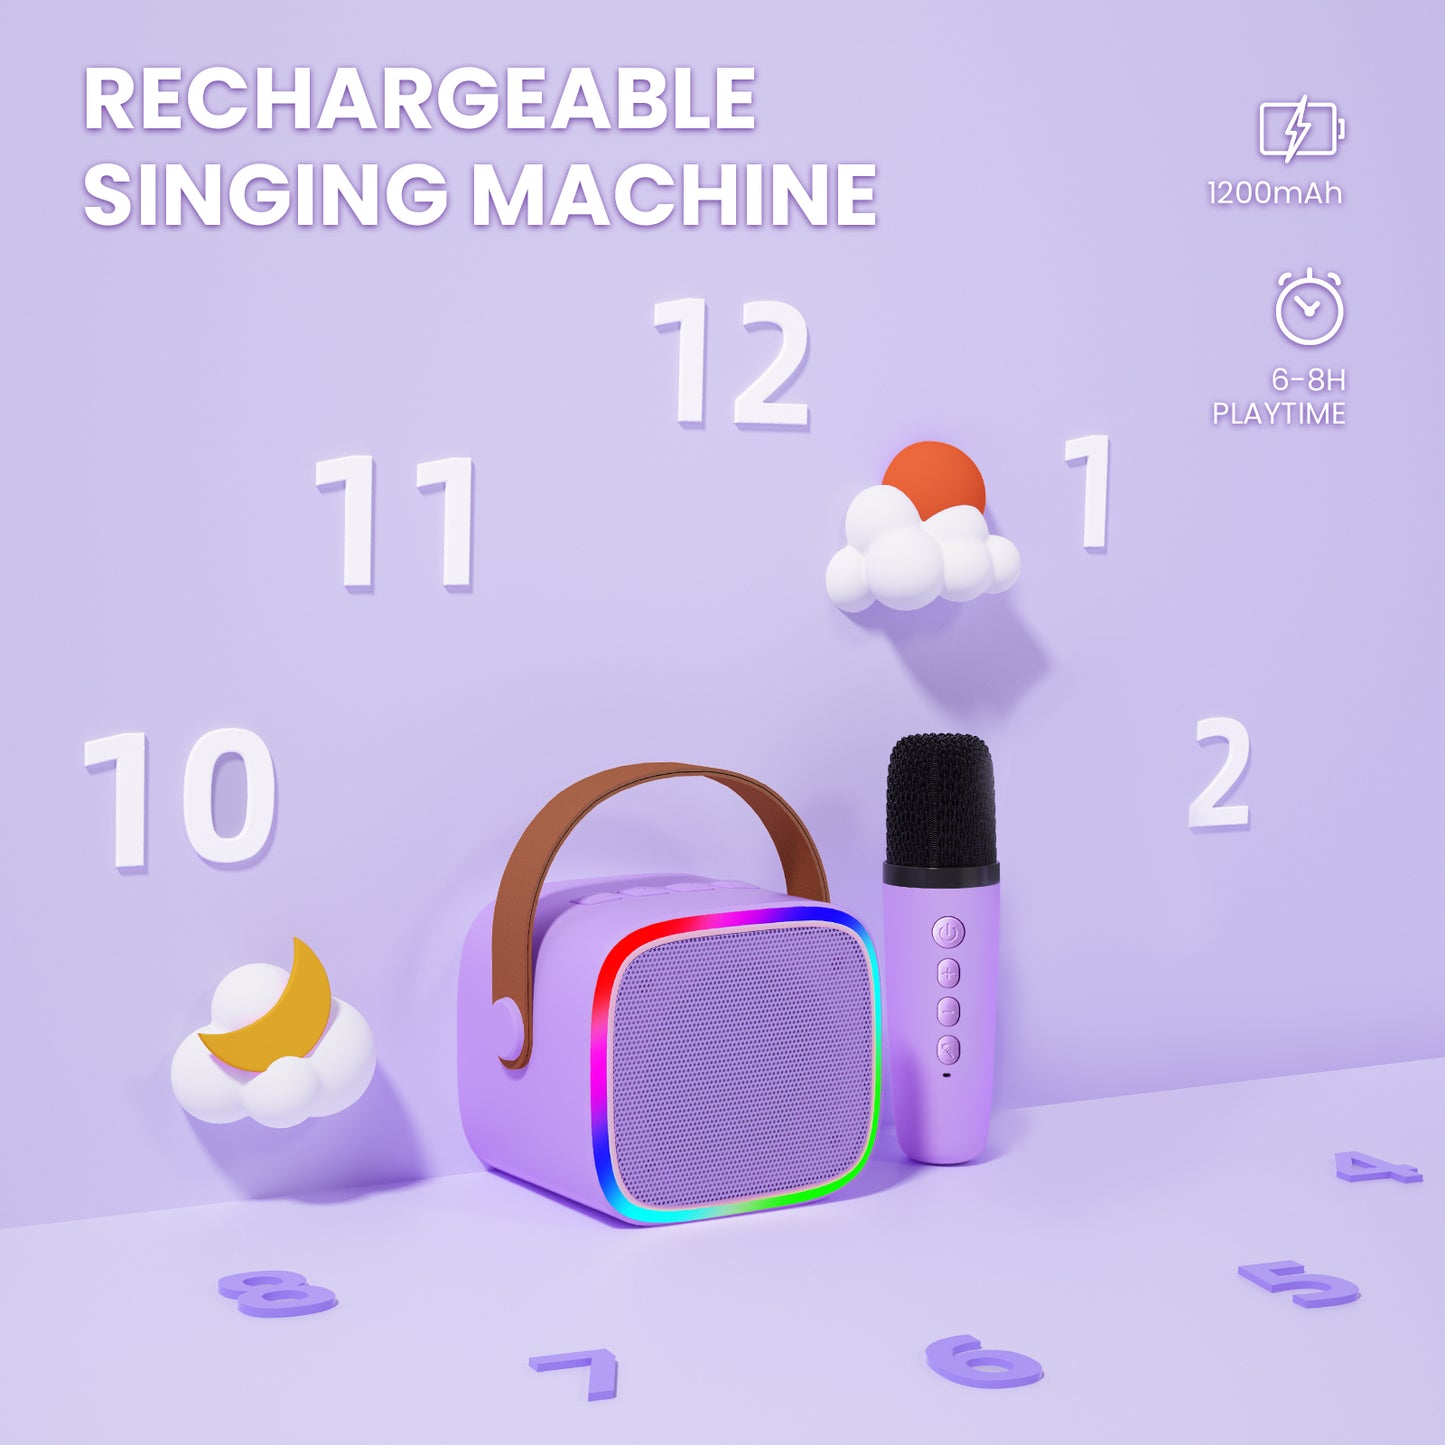 Kids Karaoke Machine Toy Set,BONAOK Portable Mini Bluetooth Speaker with Wireless Microphone Christmas Girls Boys Birthday Gifts for Years Old 4, 5, 6, 7+ Tablets & Accessories 1MIC Purple